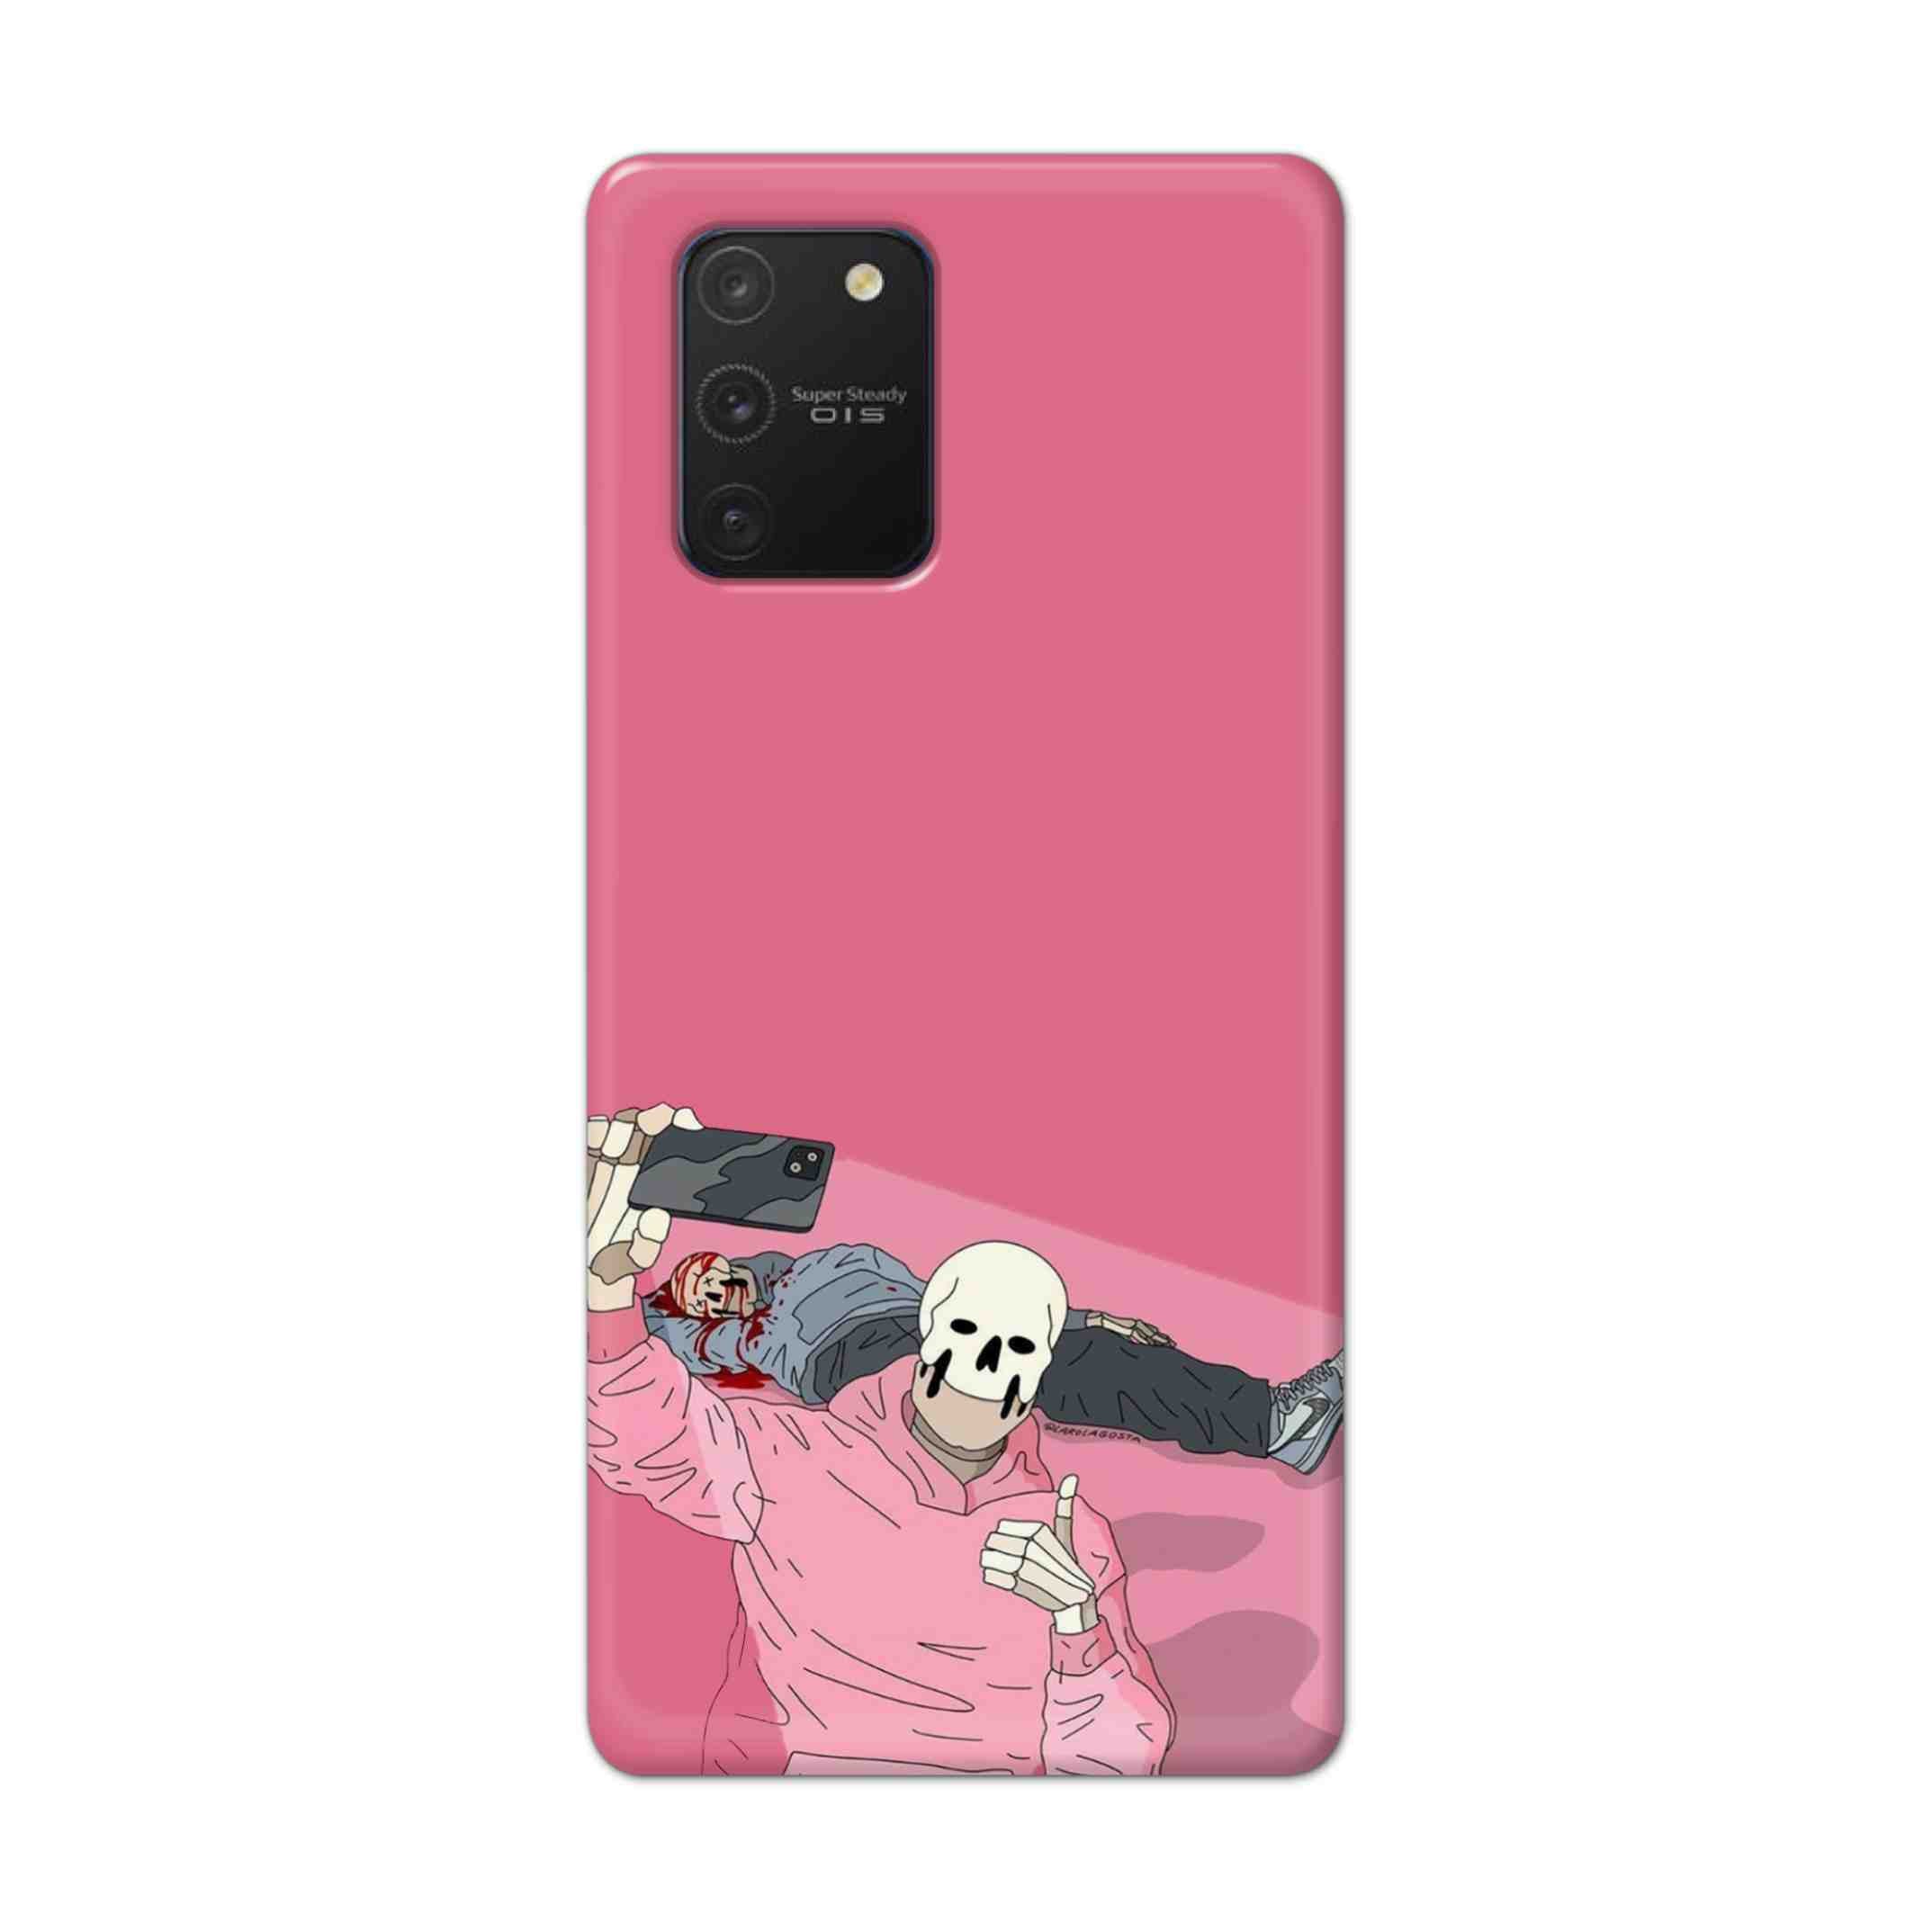 Buy Selfie Hard Back Mobile Phone Case Cover For Samsung Galaxy S10 Lite Online